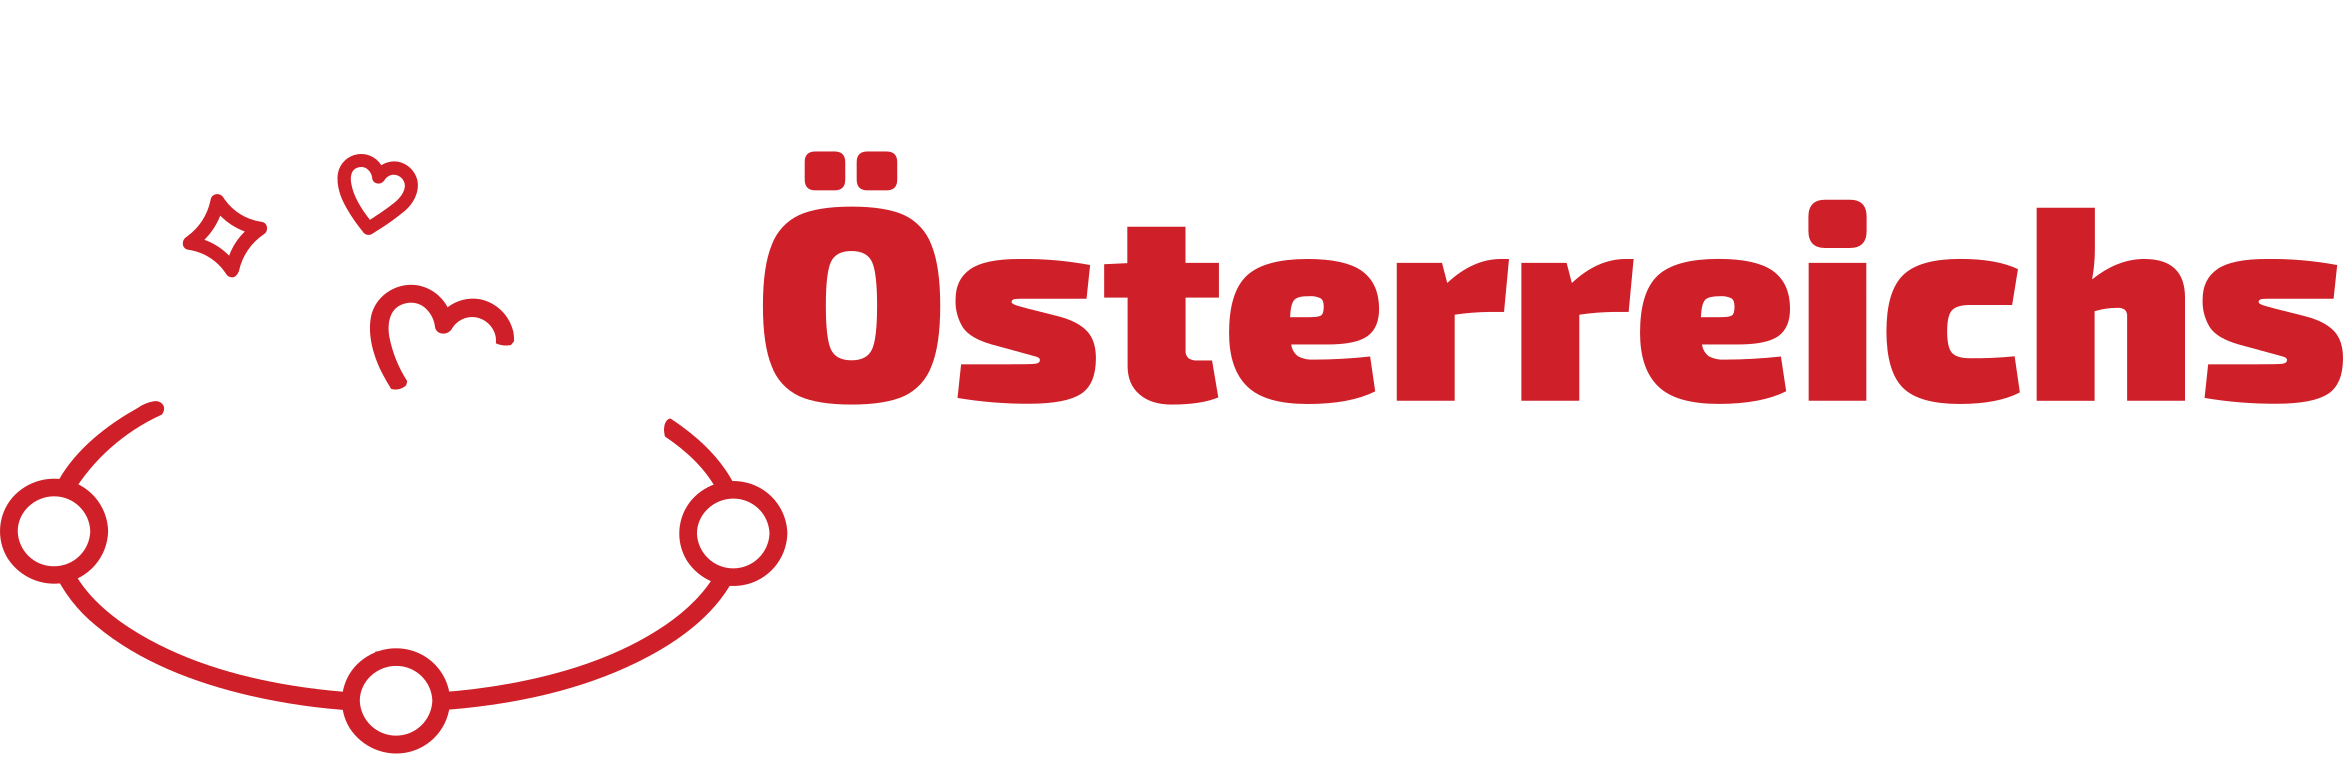 http://oesterreichonlinecasino.at/payment-methods/klarna/